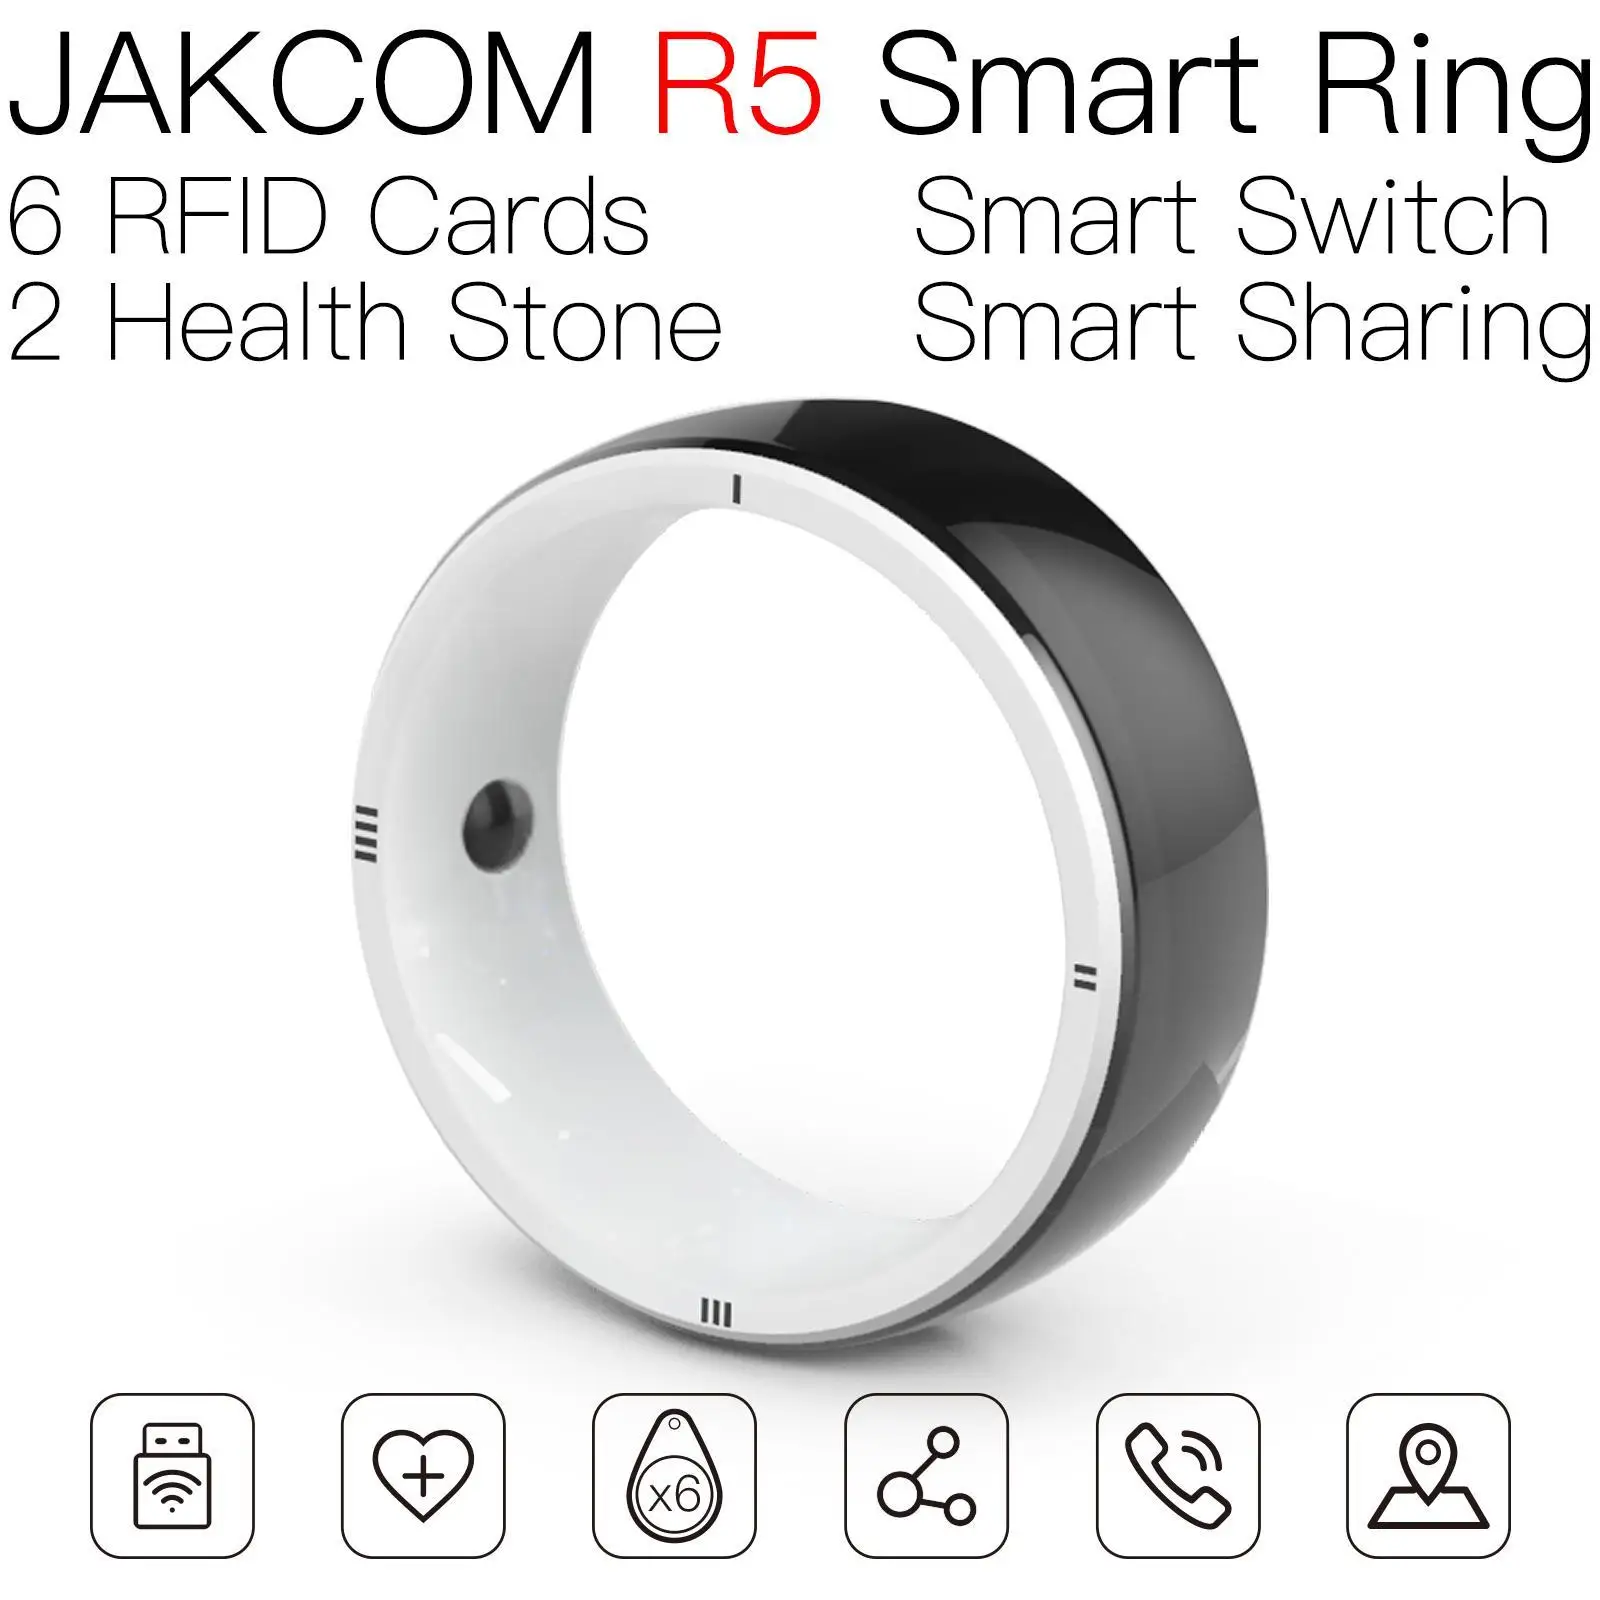 

JAKCOM R5 Smart Ring Super value than tag 125khz rewritable ic rfid card nfc support writing url with chip 125 khz read write